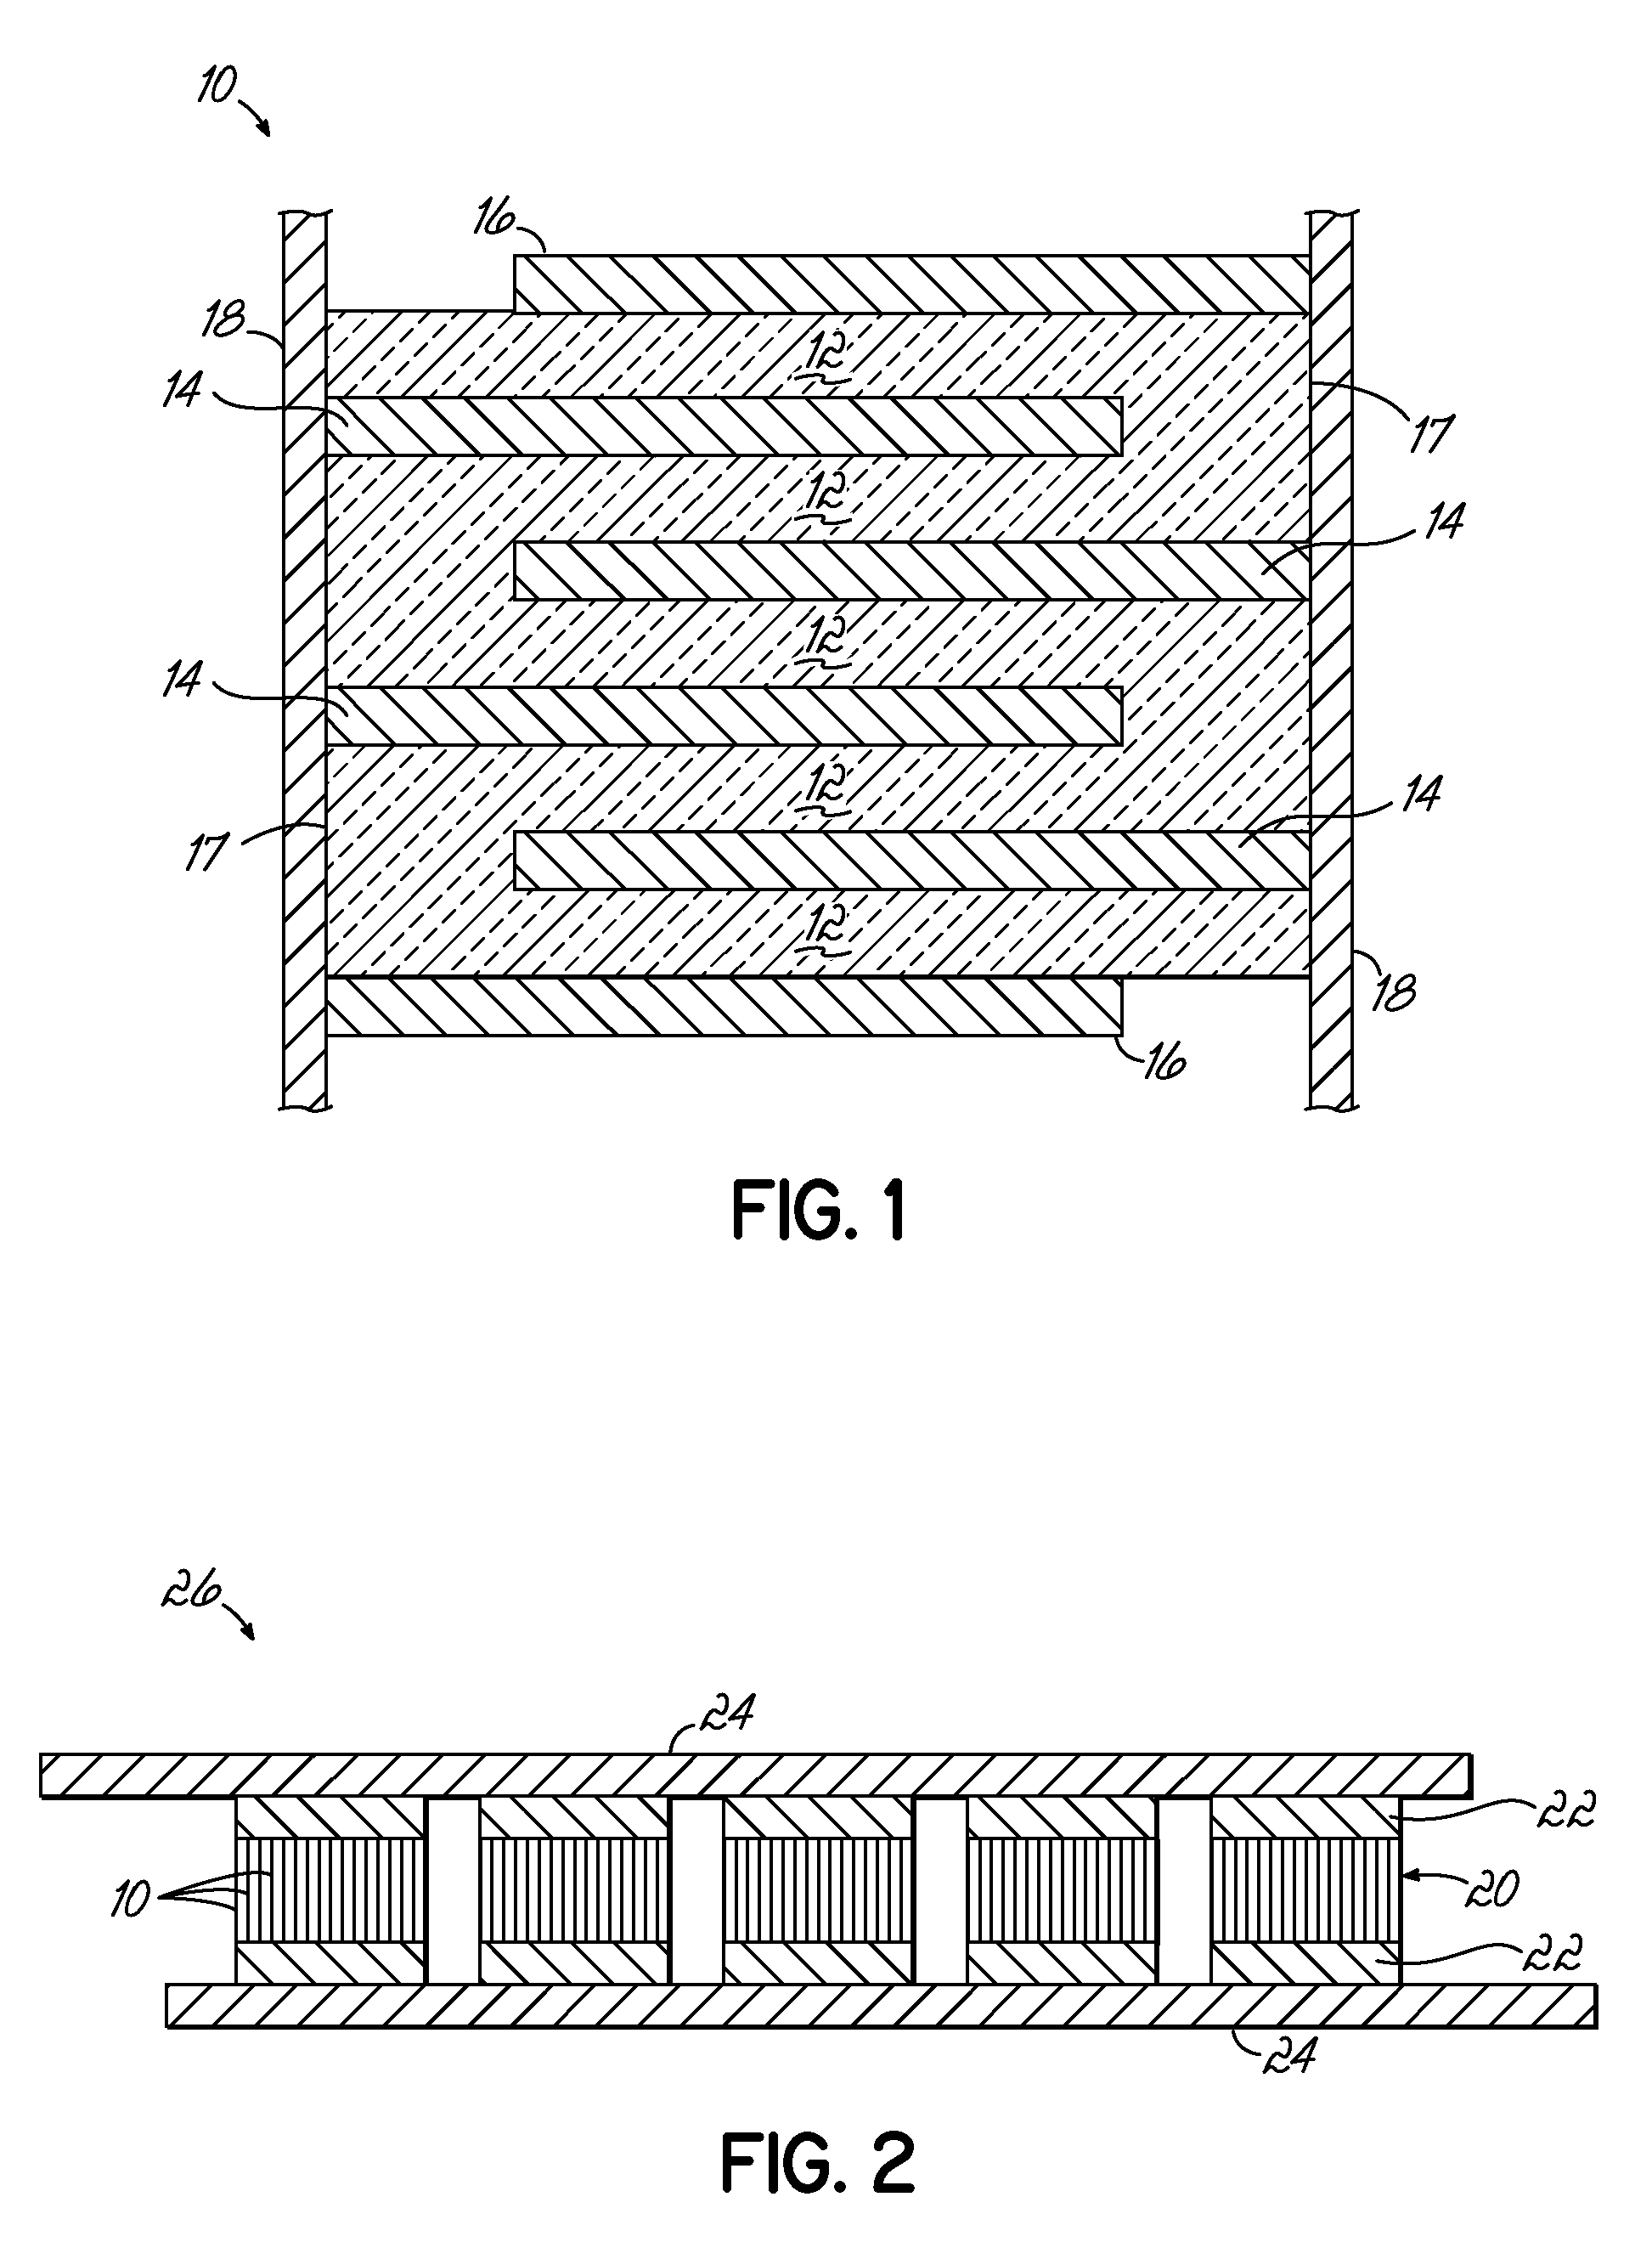 Sintered Dielectric Ceramic, Composition for Making, and Use Thereof In Multilayer Capacitor And Energy Storage Device